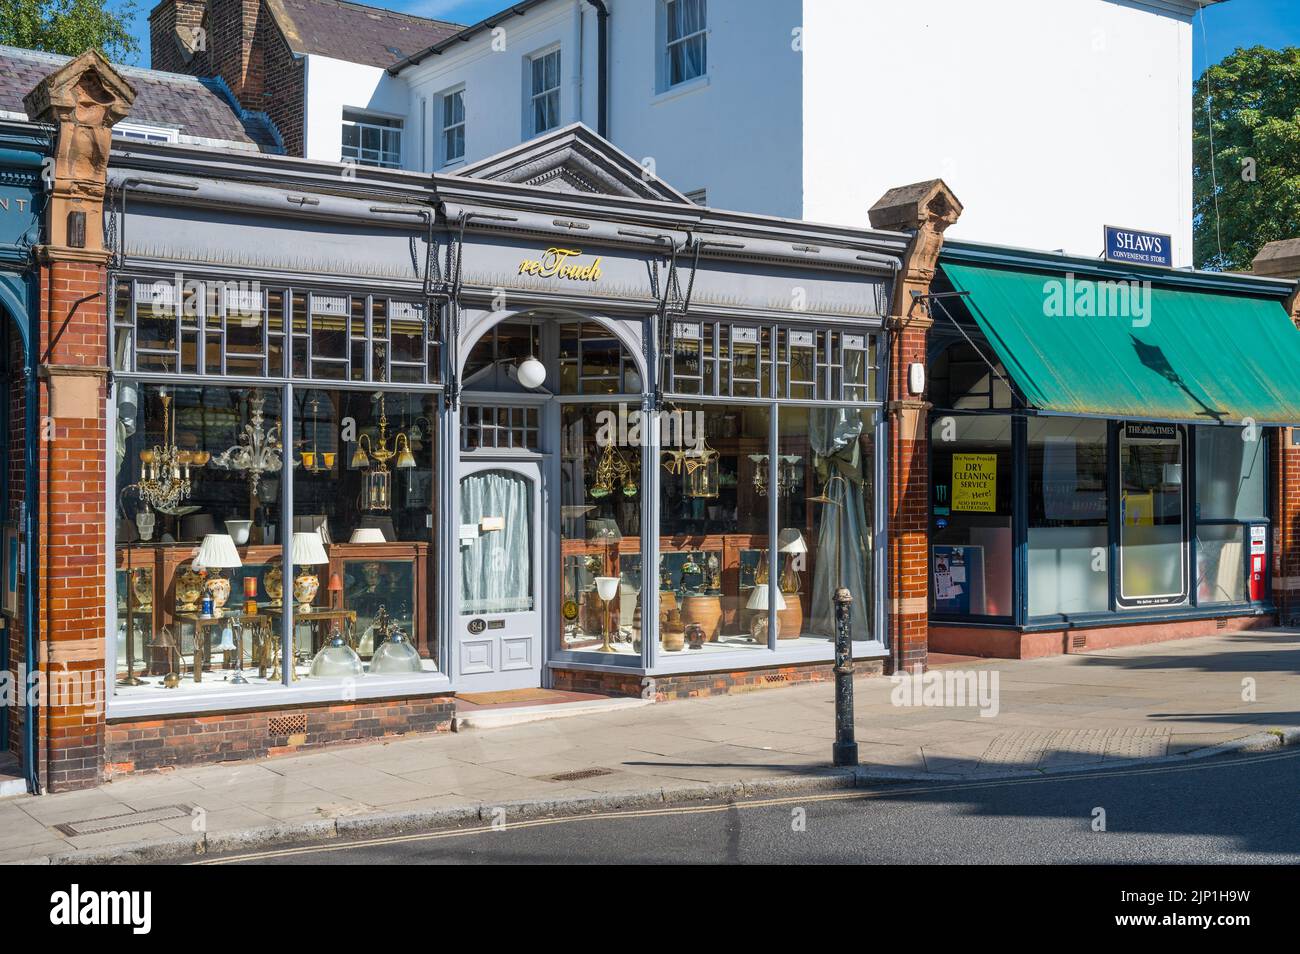 Retouch Lighting shop, specialists in antique lighting and bespoke lighting design. High Street, Harrow on the Hill, Greater London, England, UK Stock Photo